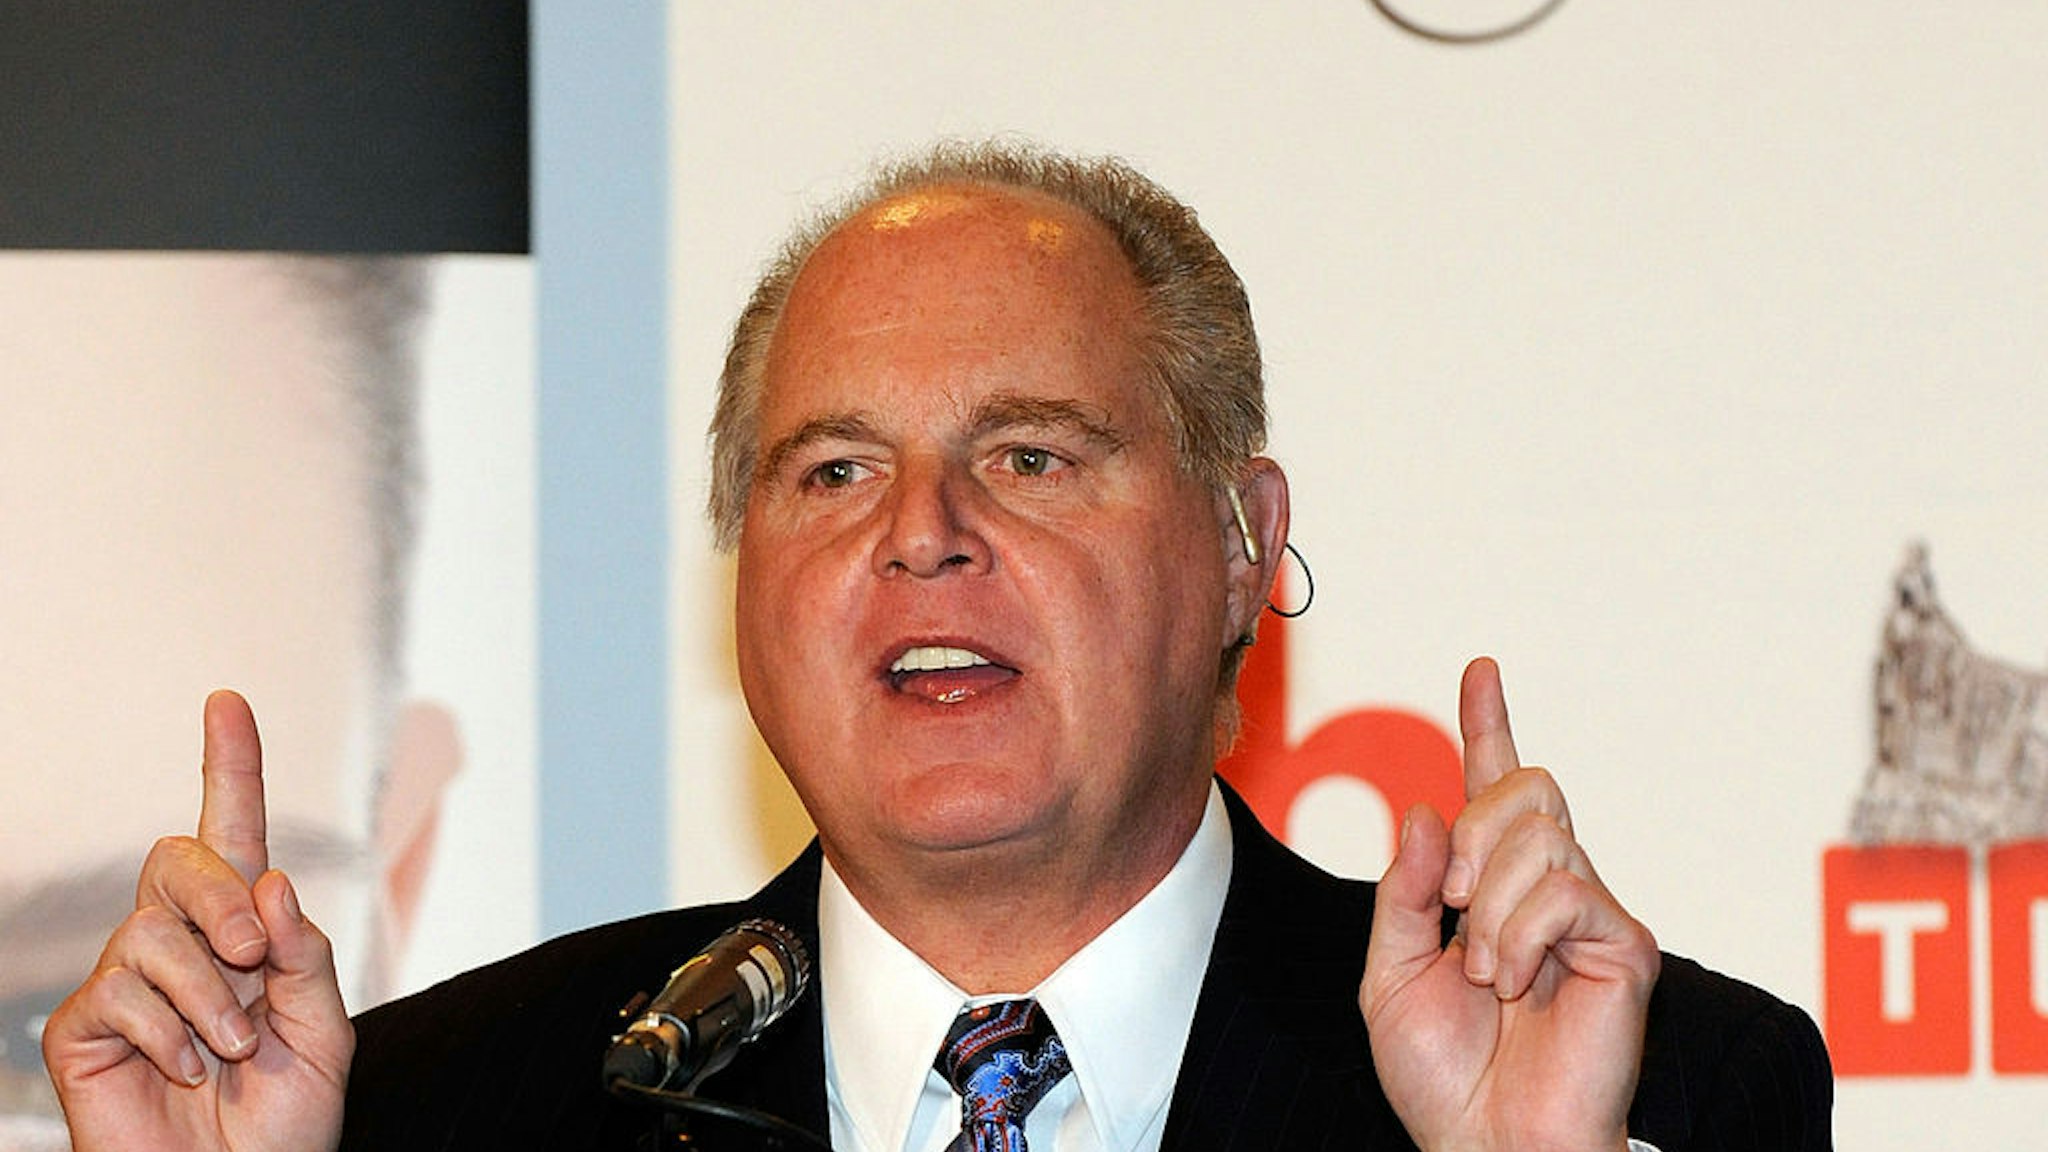 Rush Limbaugh during a news conference for judges in the 2010 Miss America Pageant at the Planet Hollywood Resort &amp; Casino January 27, 2010 in Las Vegas, Nevada. The pageant will be held at the resort on January 30, 2010.